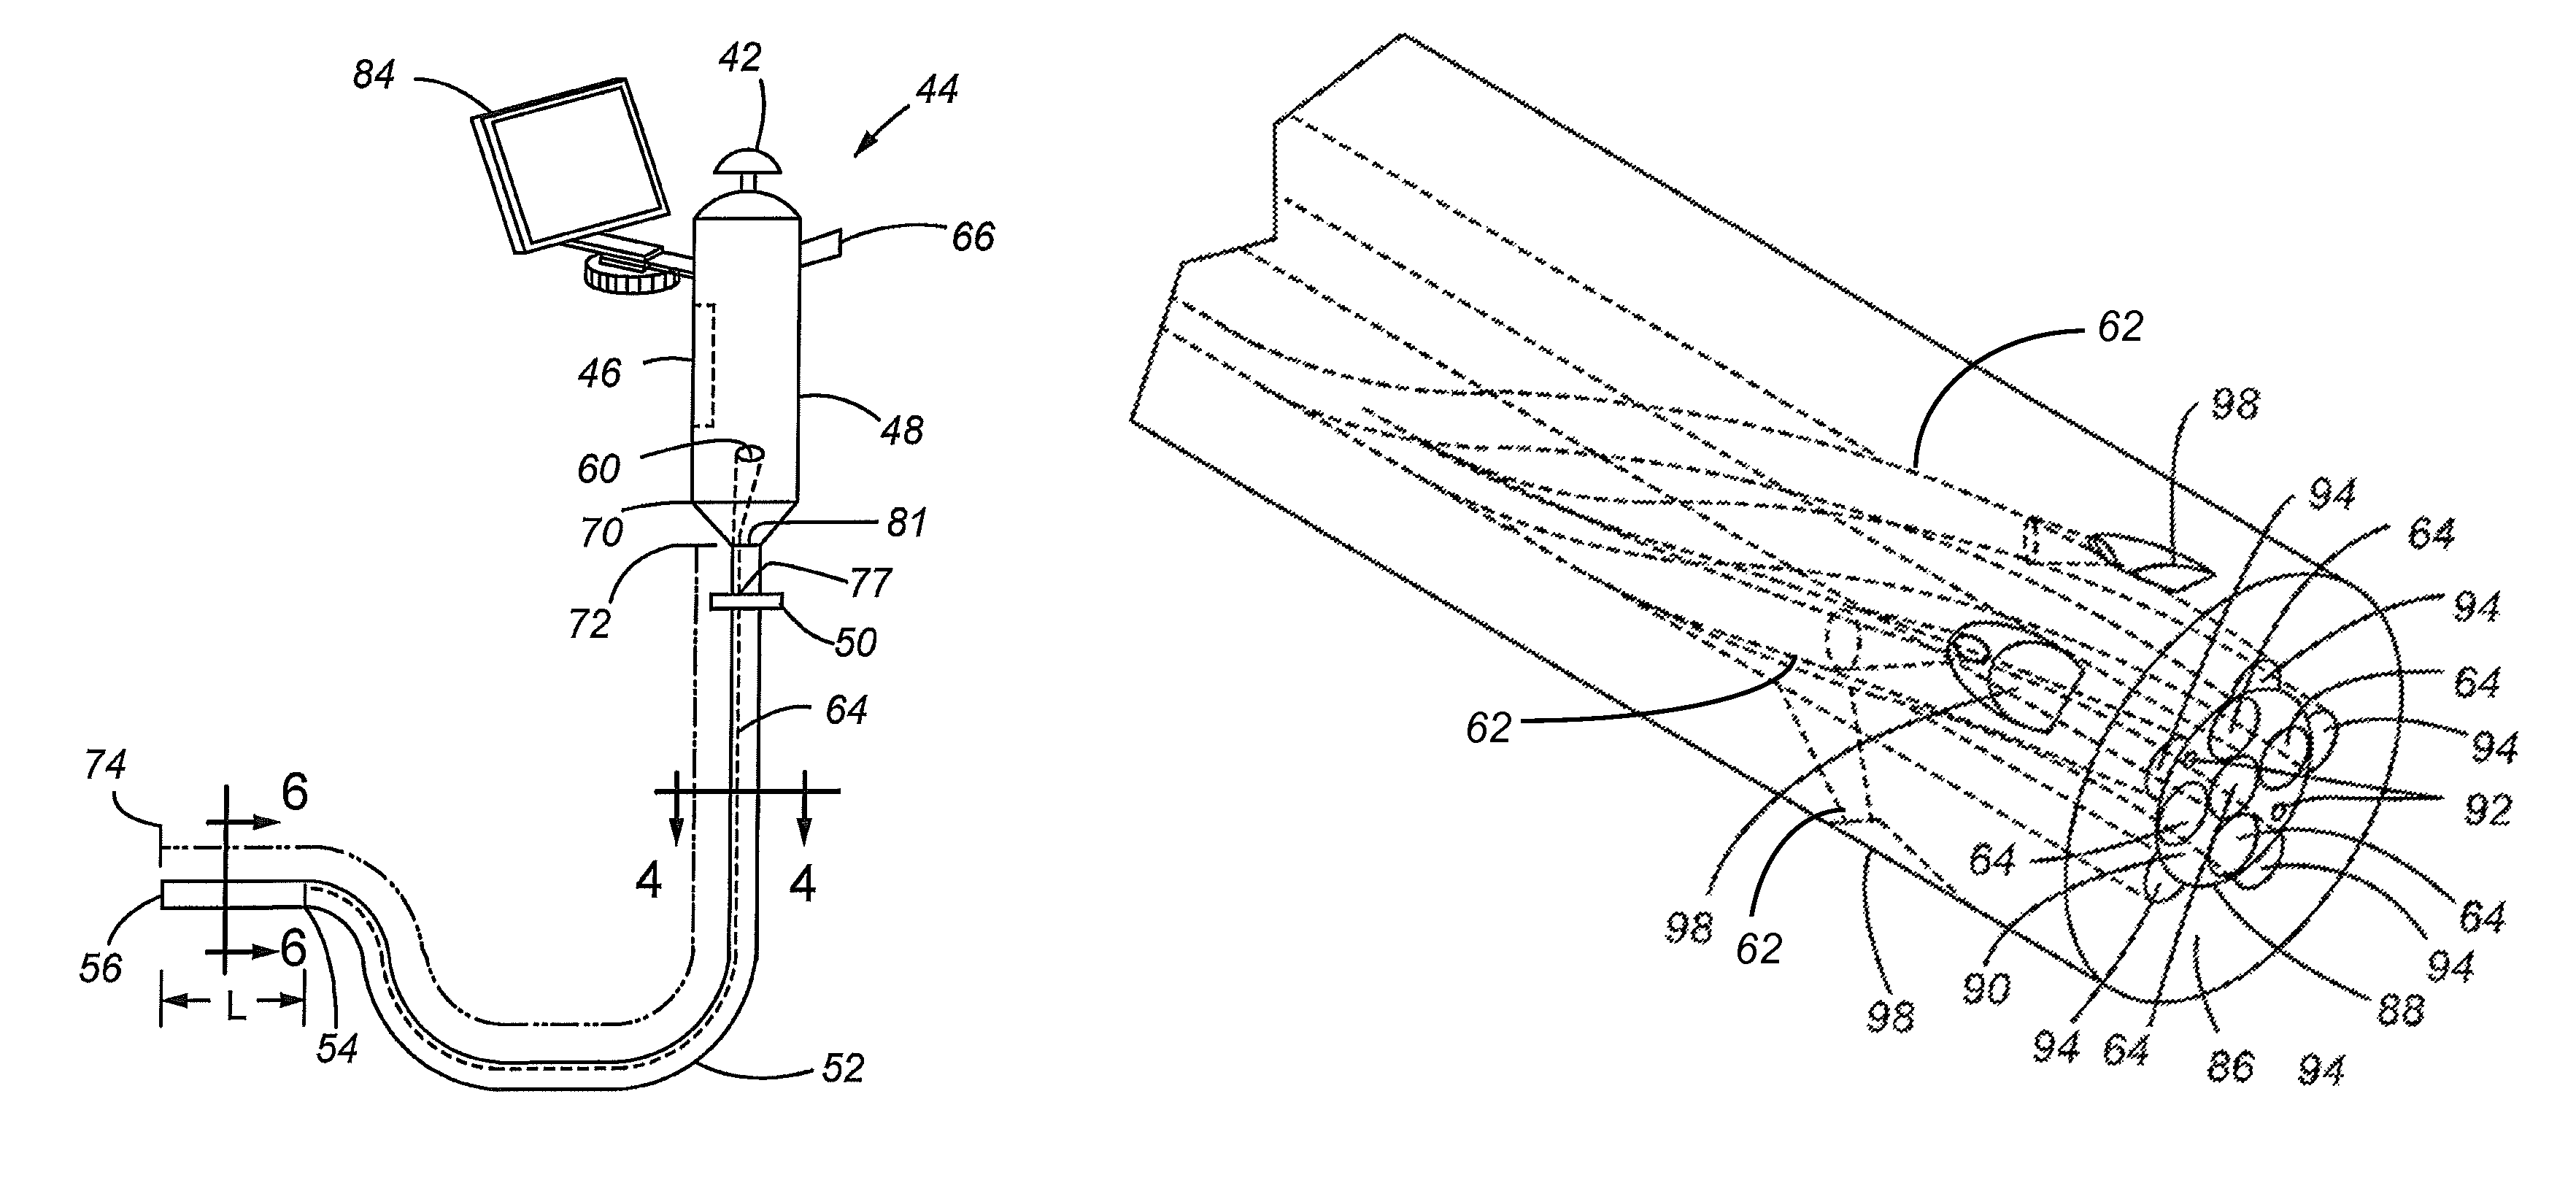 Modifications in endoscope apparatus, using fluid and gas dynamics, and methods for improving visibility during endoscopy